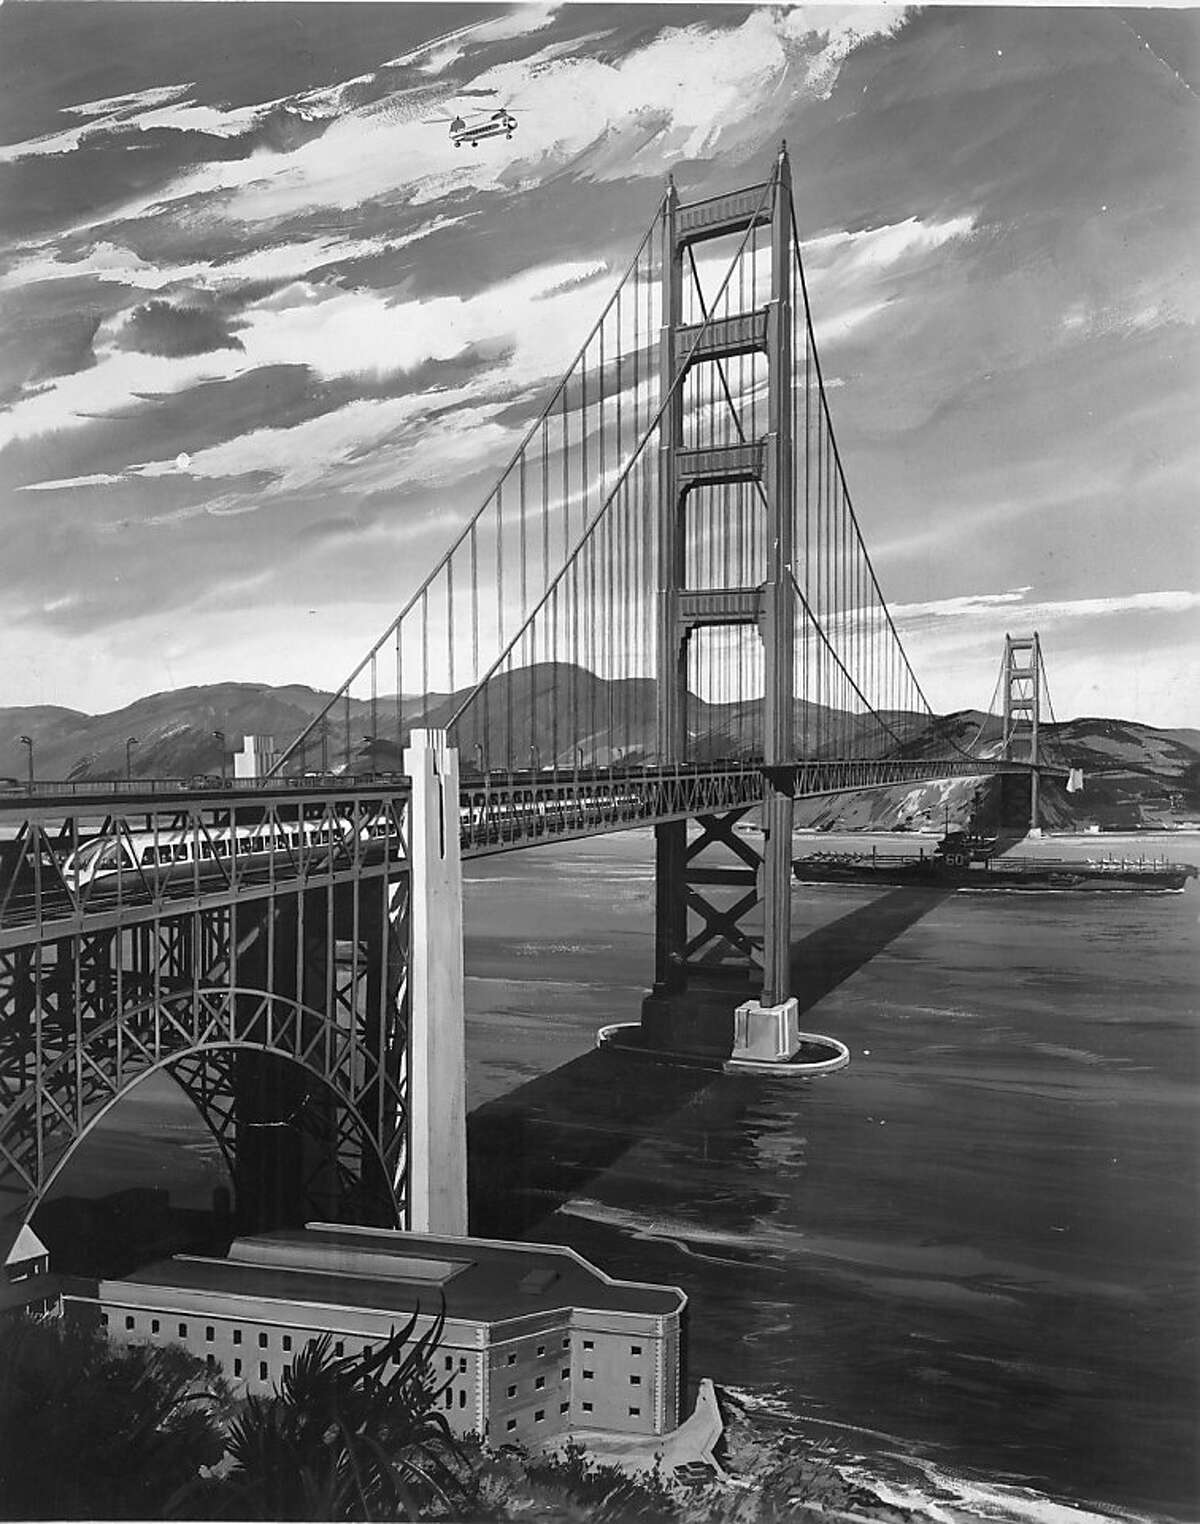 insight02_holiday03.jpg This BART illustration shows a rapid transit train on the double-decked Golden Gate Bridge. East Bay Rapid Transit 1961 Chronicle File